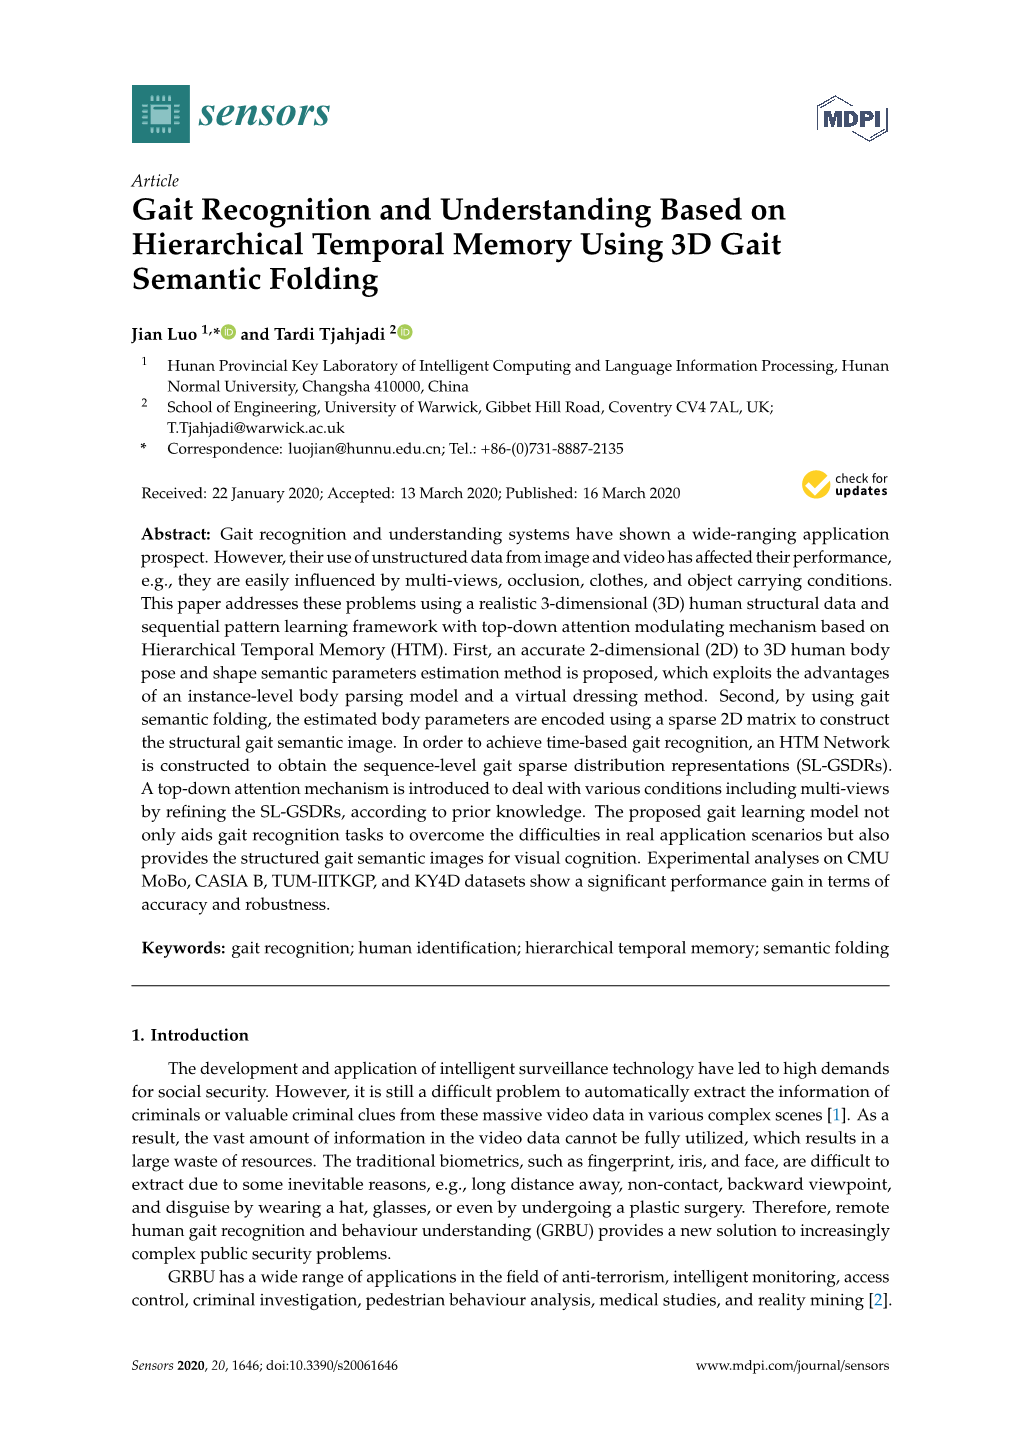 Gait Recognition and Understanding Based on Hierarchical Temporal Memory Using 3D Gait Semantic Folding